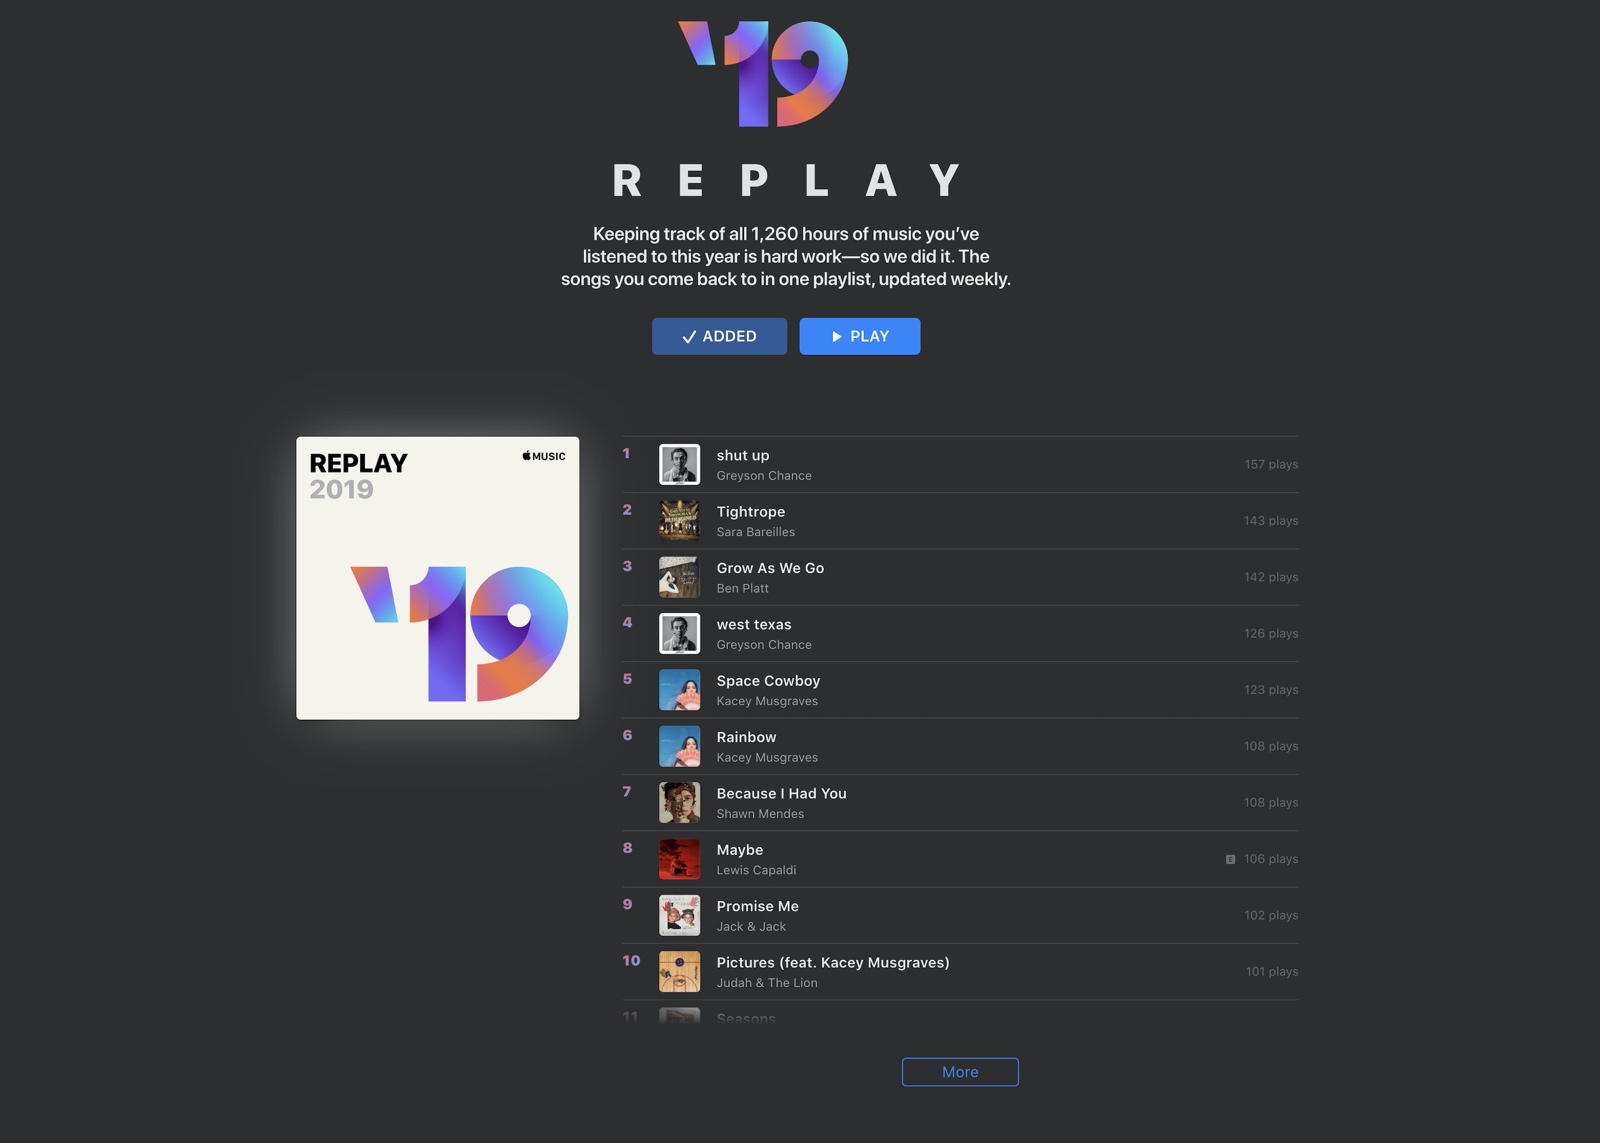 Apple Music Gains New 'Replay' Playlist With Your Top Songs Played in 2019